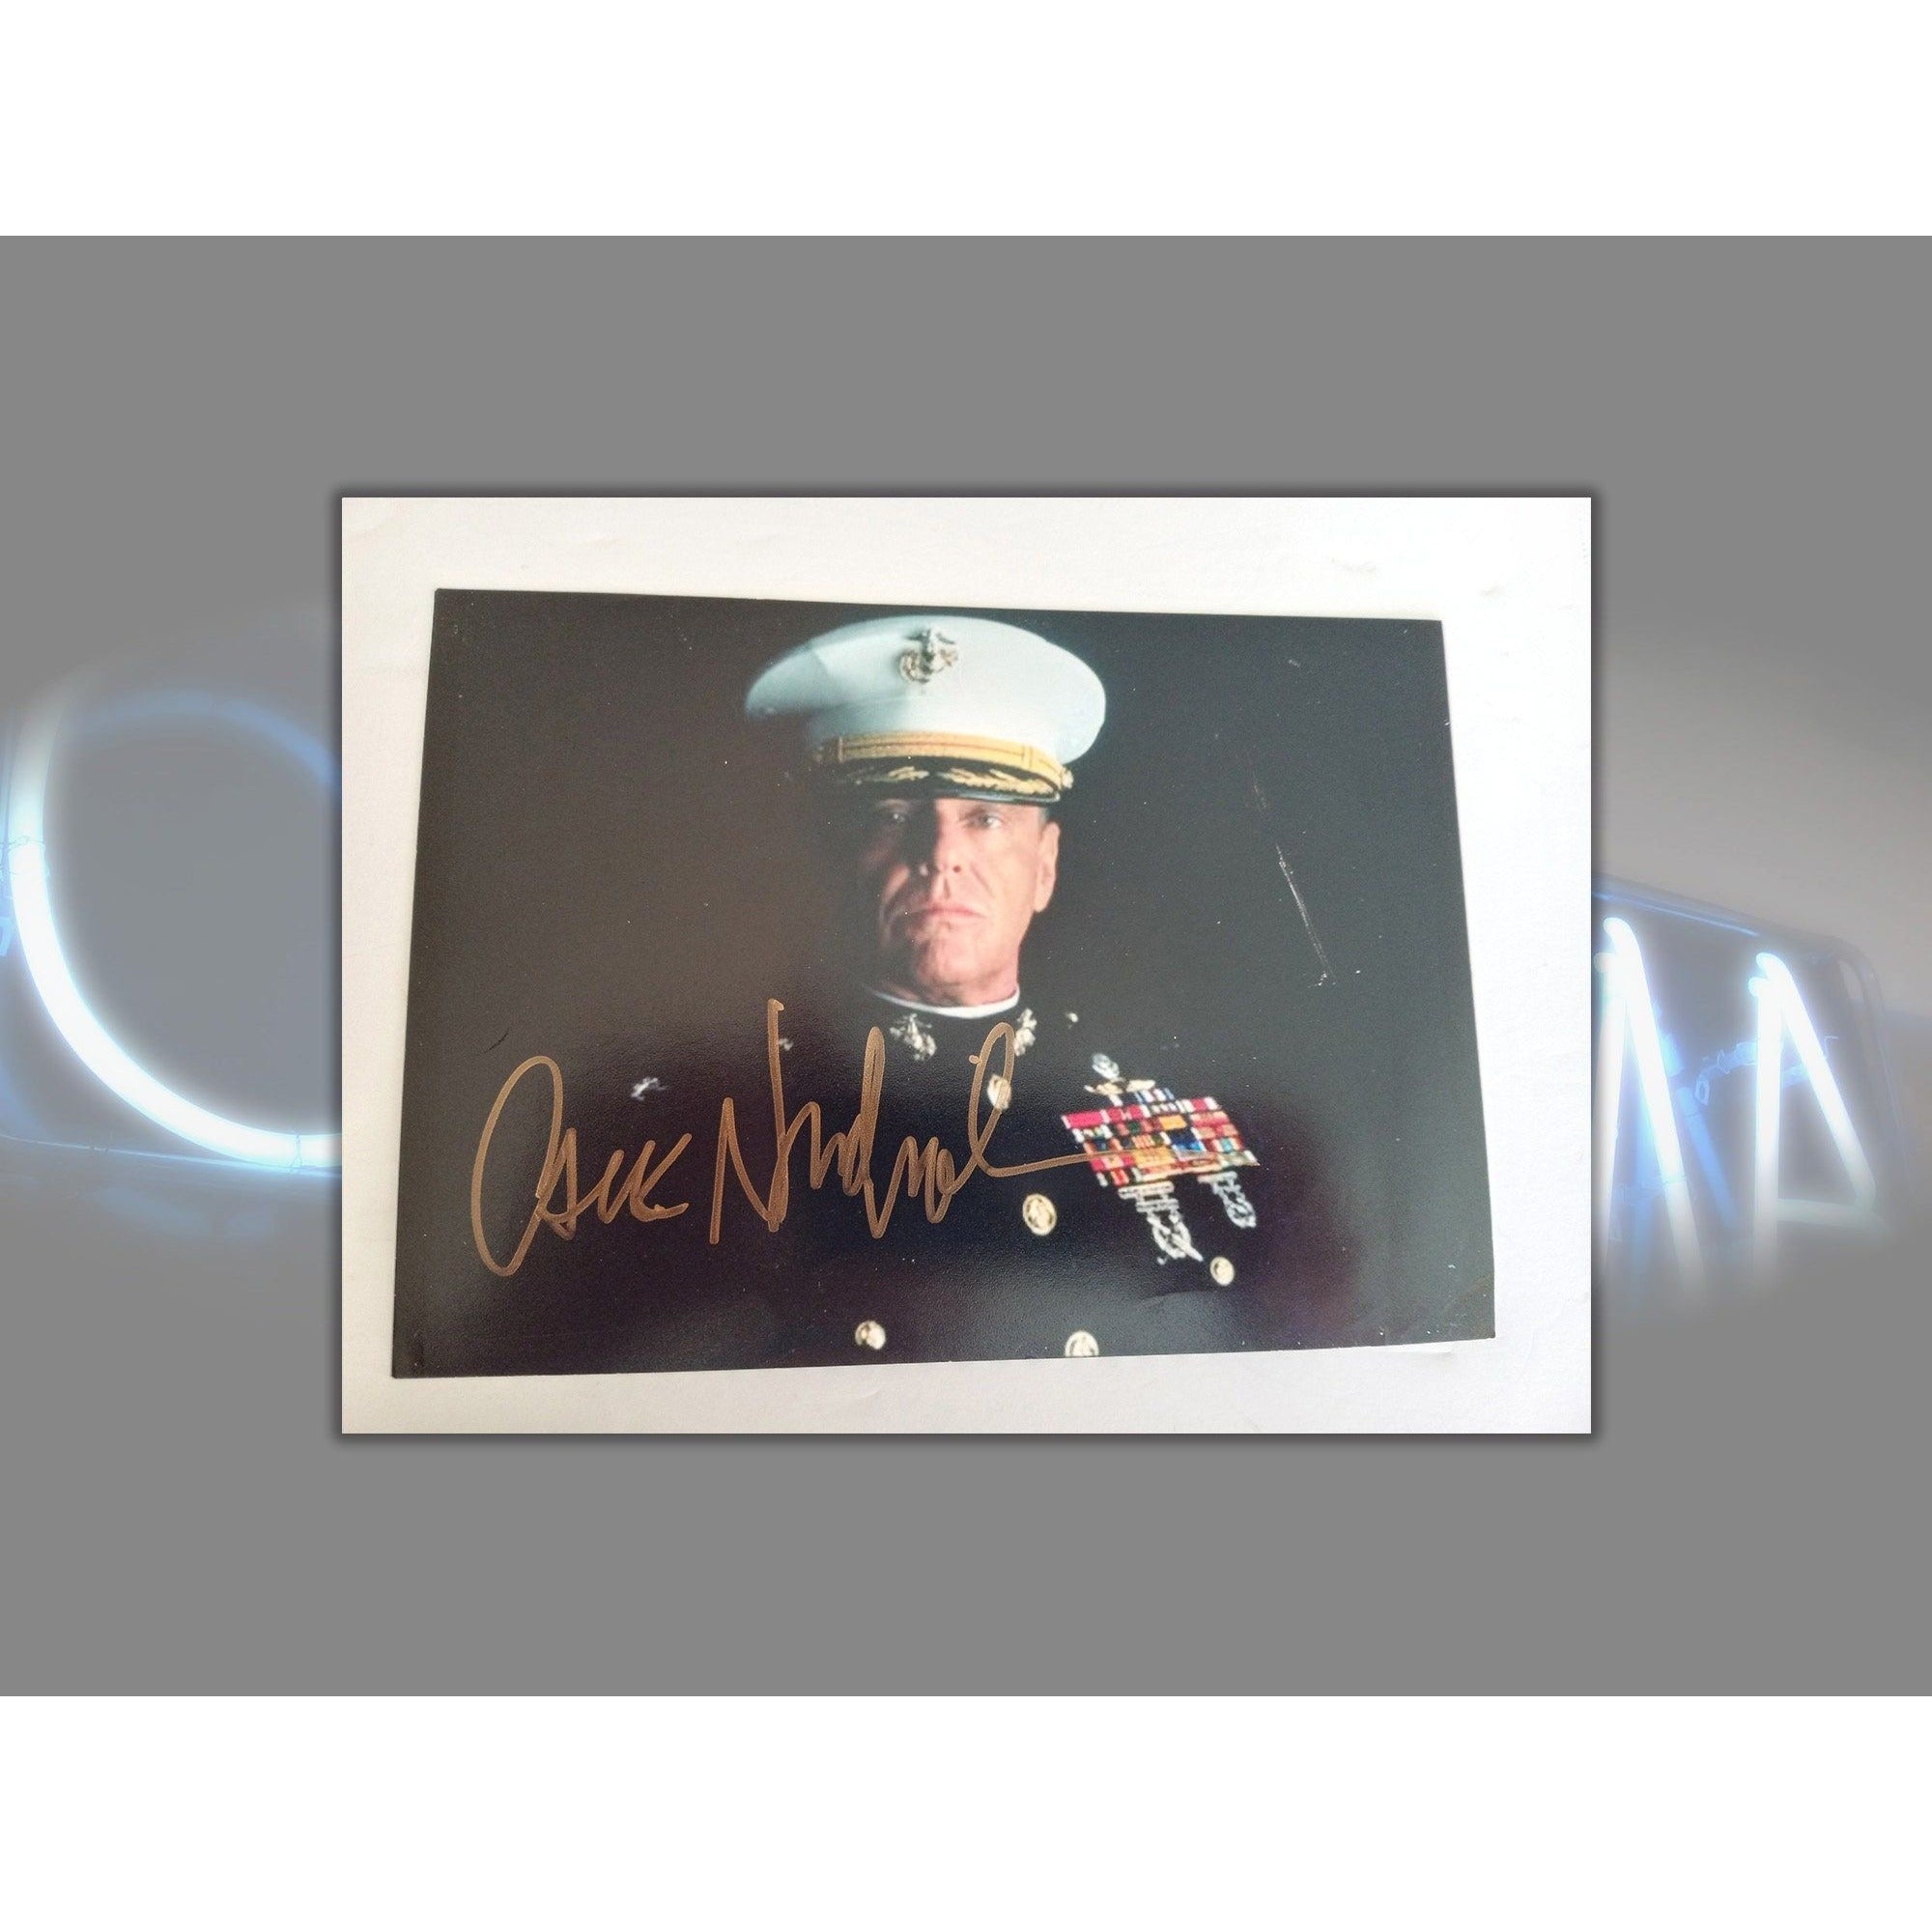 Jack Nicholson "A Few Good Men" 5 x 7 photo signed with proof